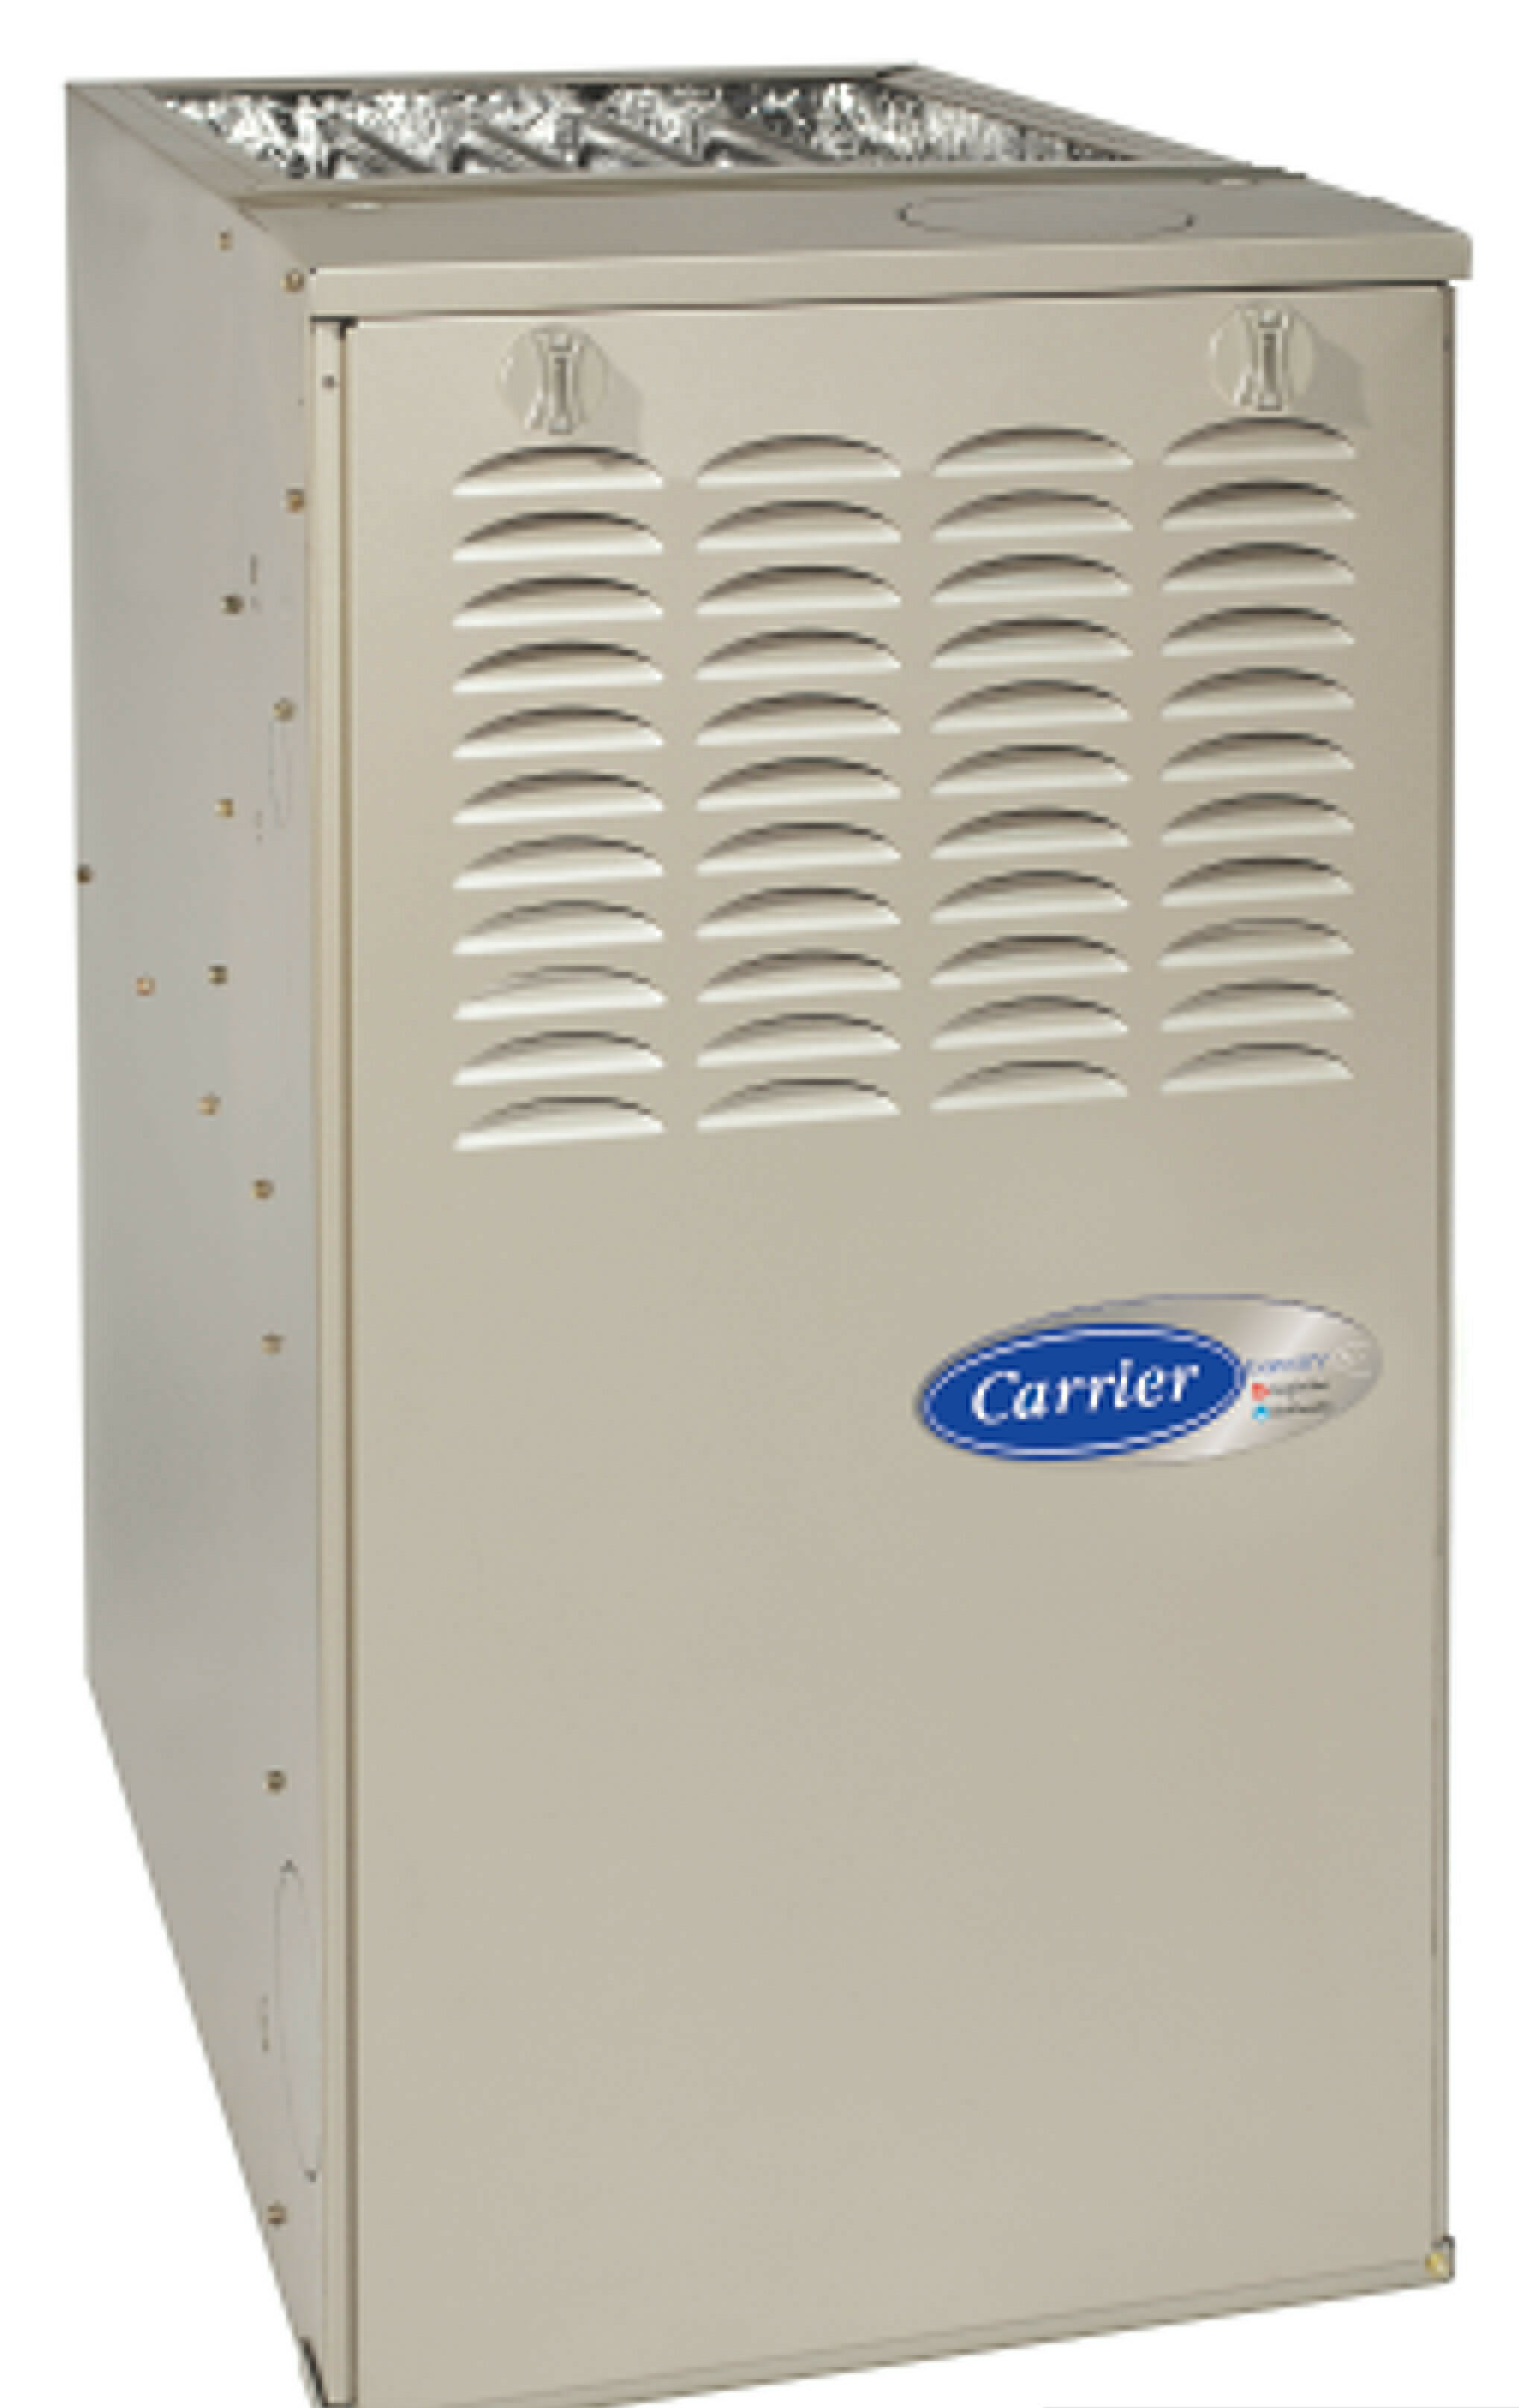 Carrier heater from Warren Heating and Cooling